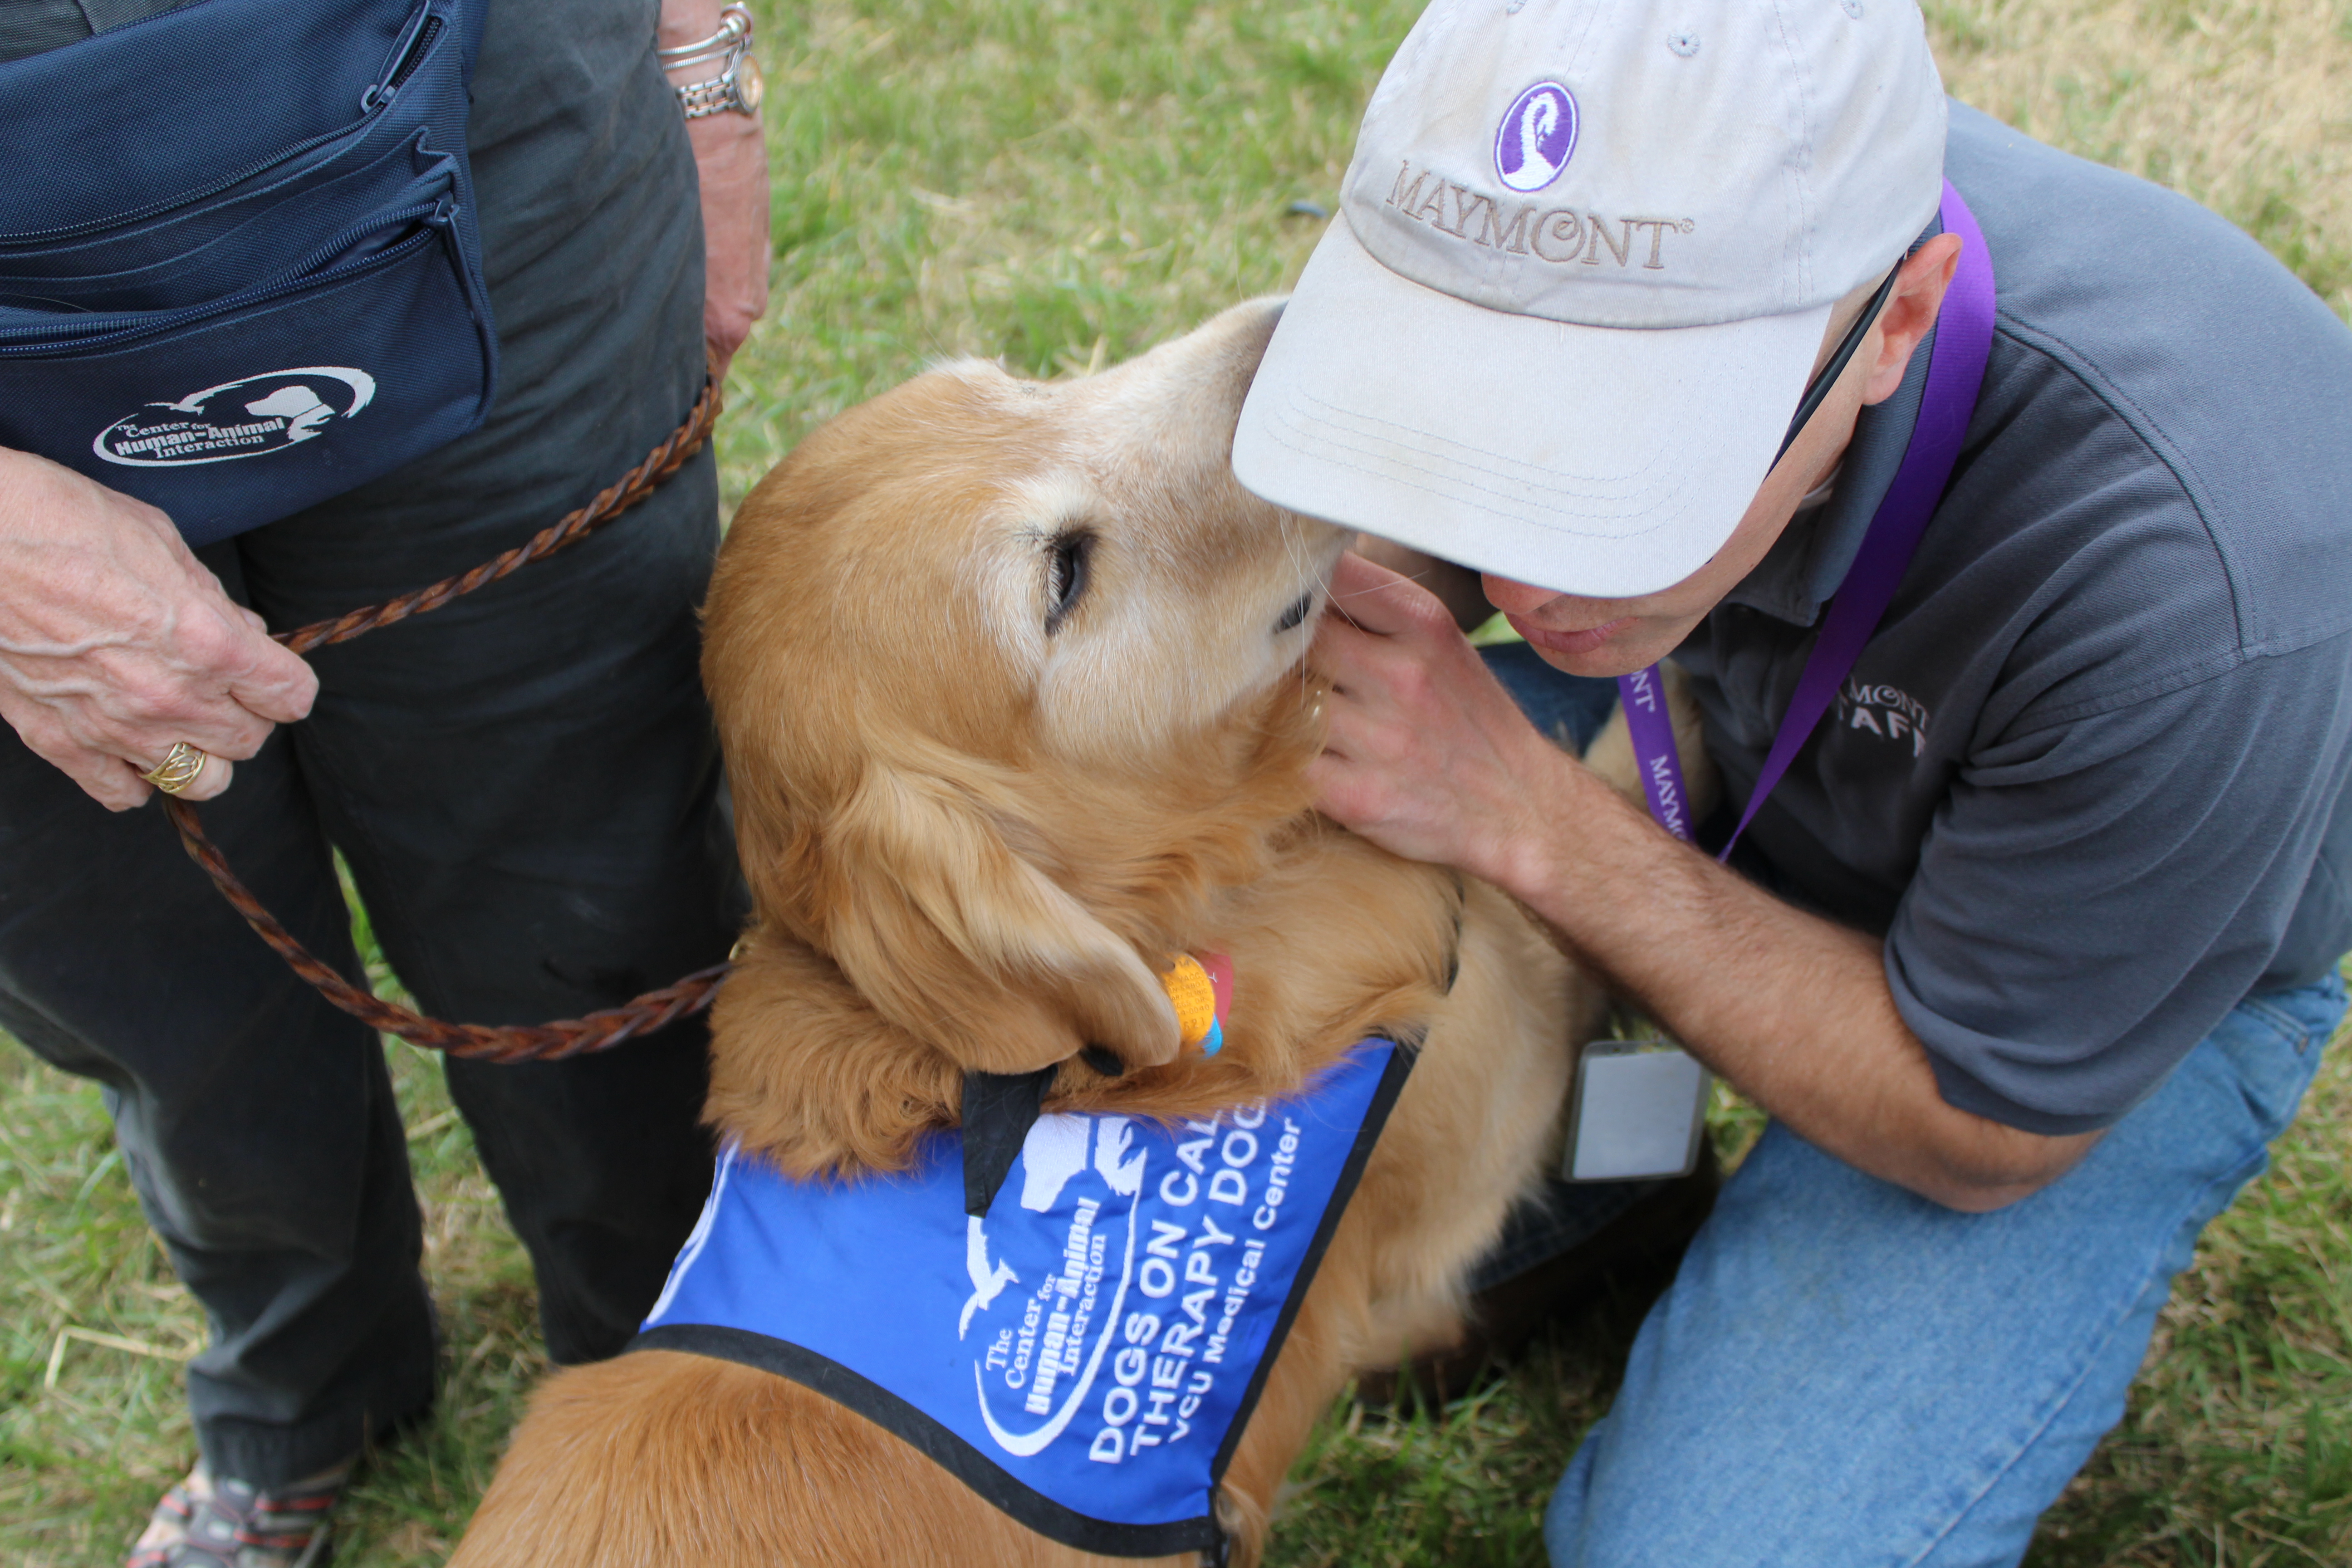 Dogs On Call therapy dog Dusty, a golden retriever, gives affection to a Maymont staff member at Maymont's Children's Farm for the Grand Reopening.